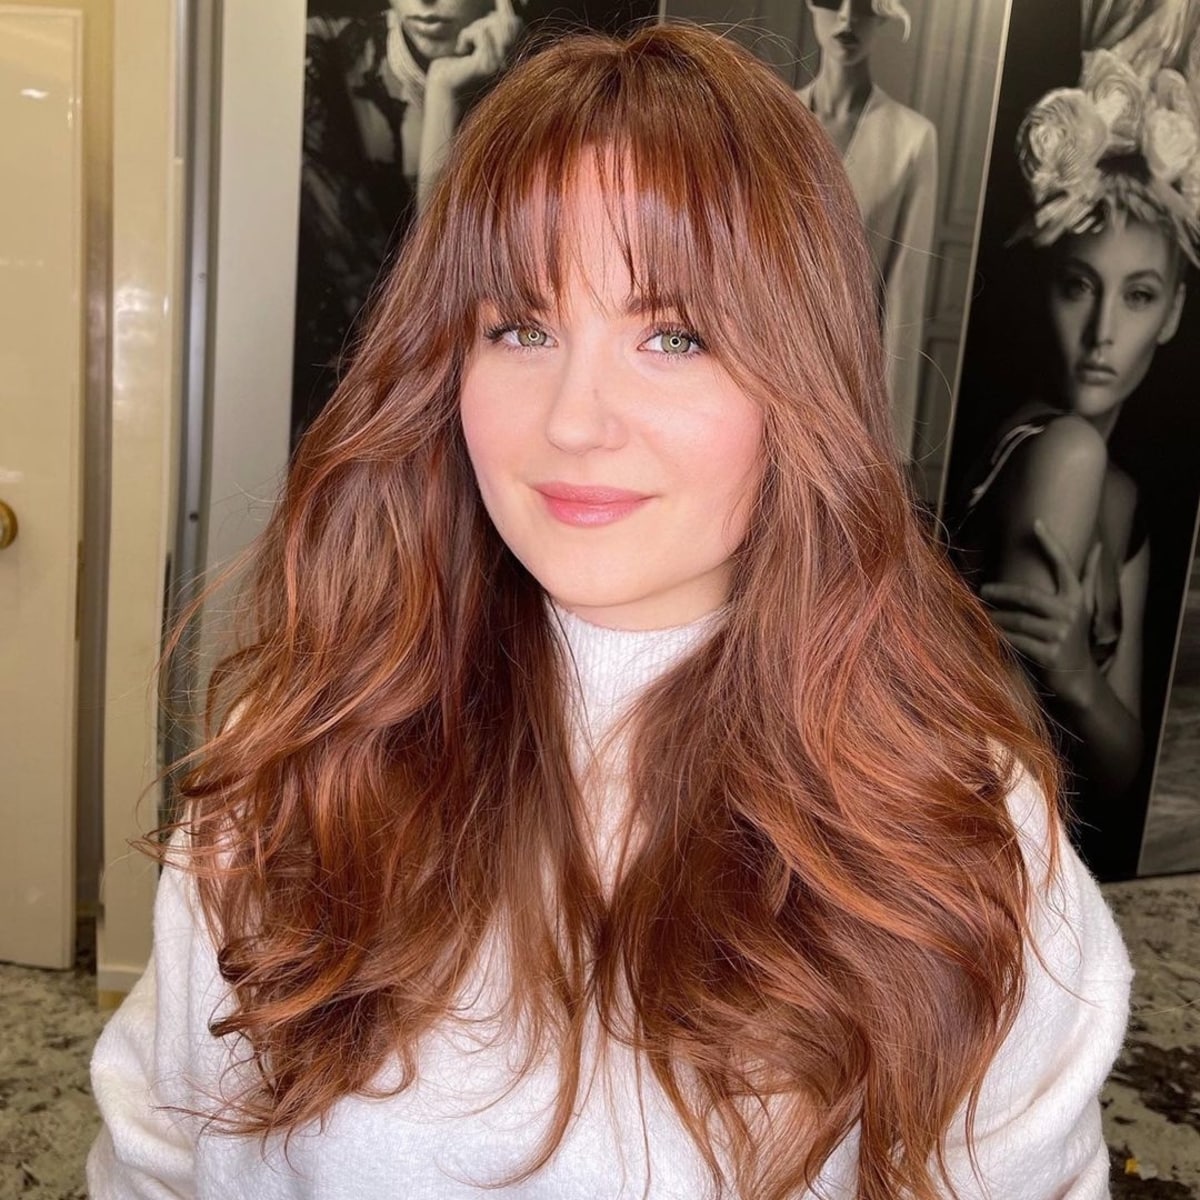 Feminine long layered hair with arched bangs